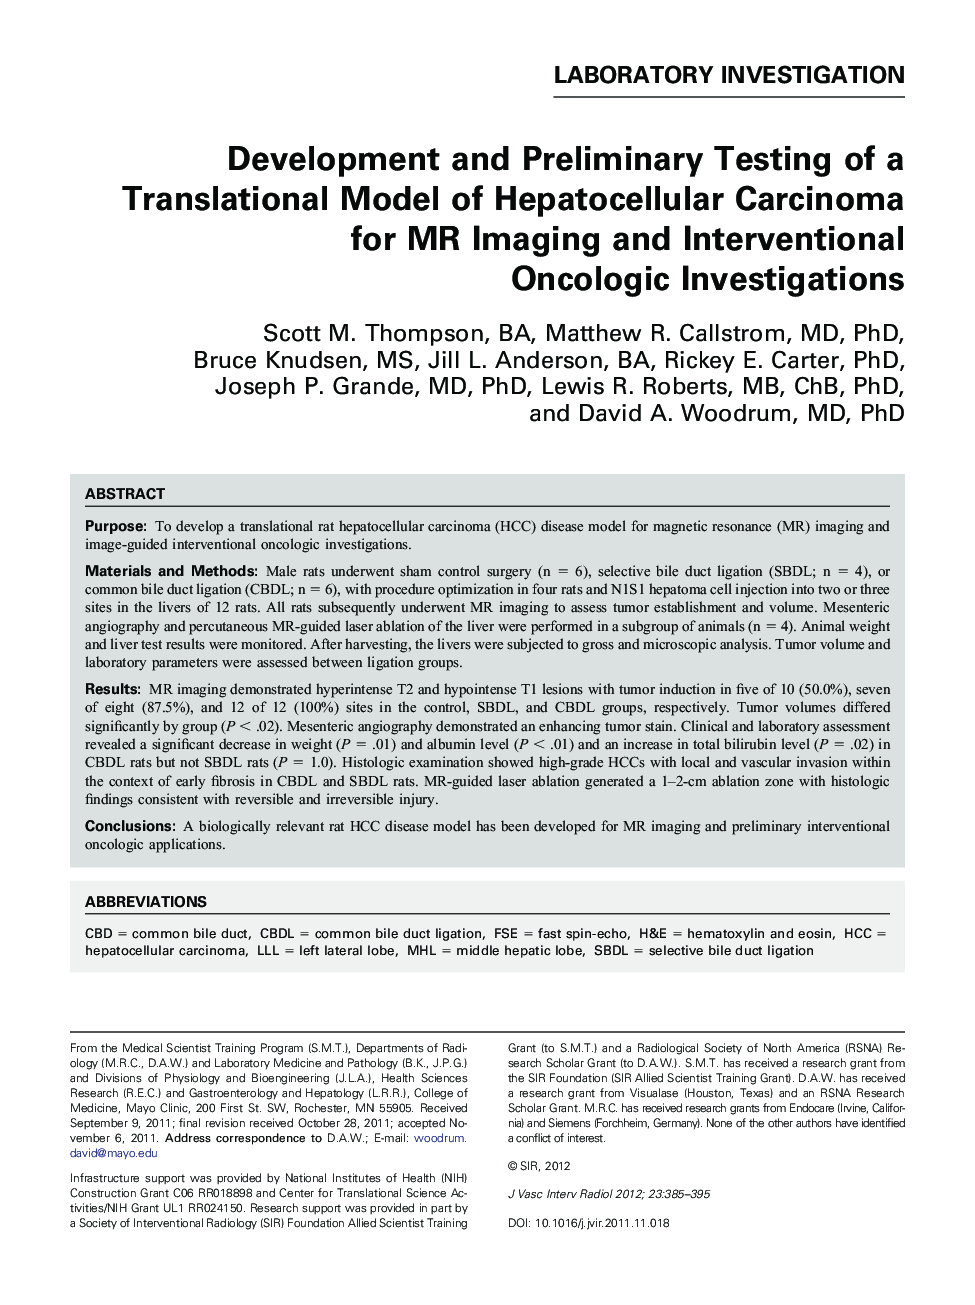 Development and Preliminary Testing of a Translational Model of Hepatocellular Carcinoma for MR Imaging and Interventional Oncologic Investigations